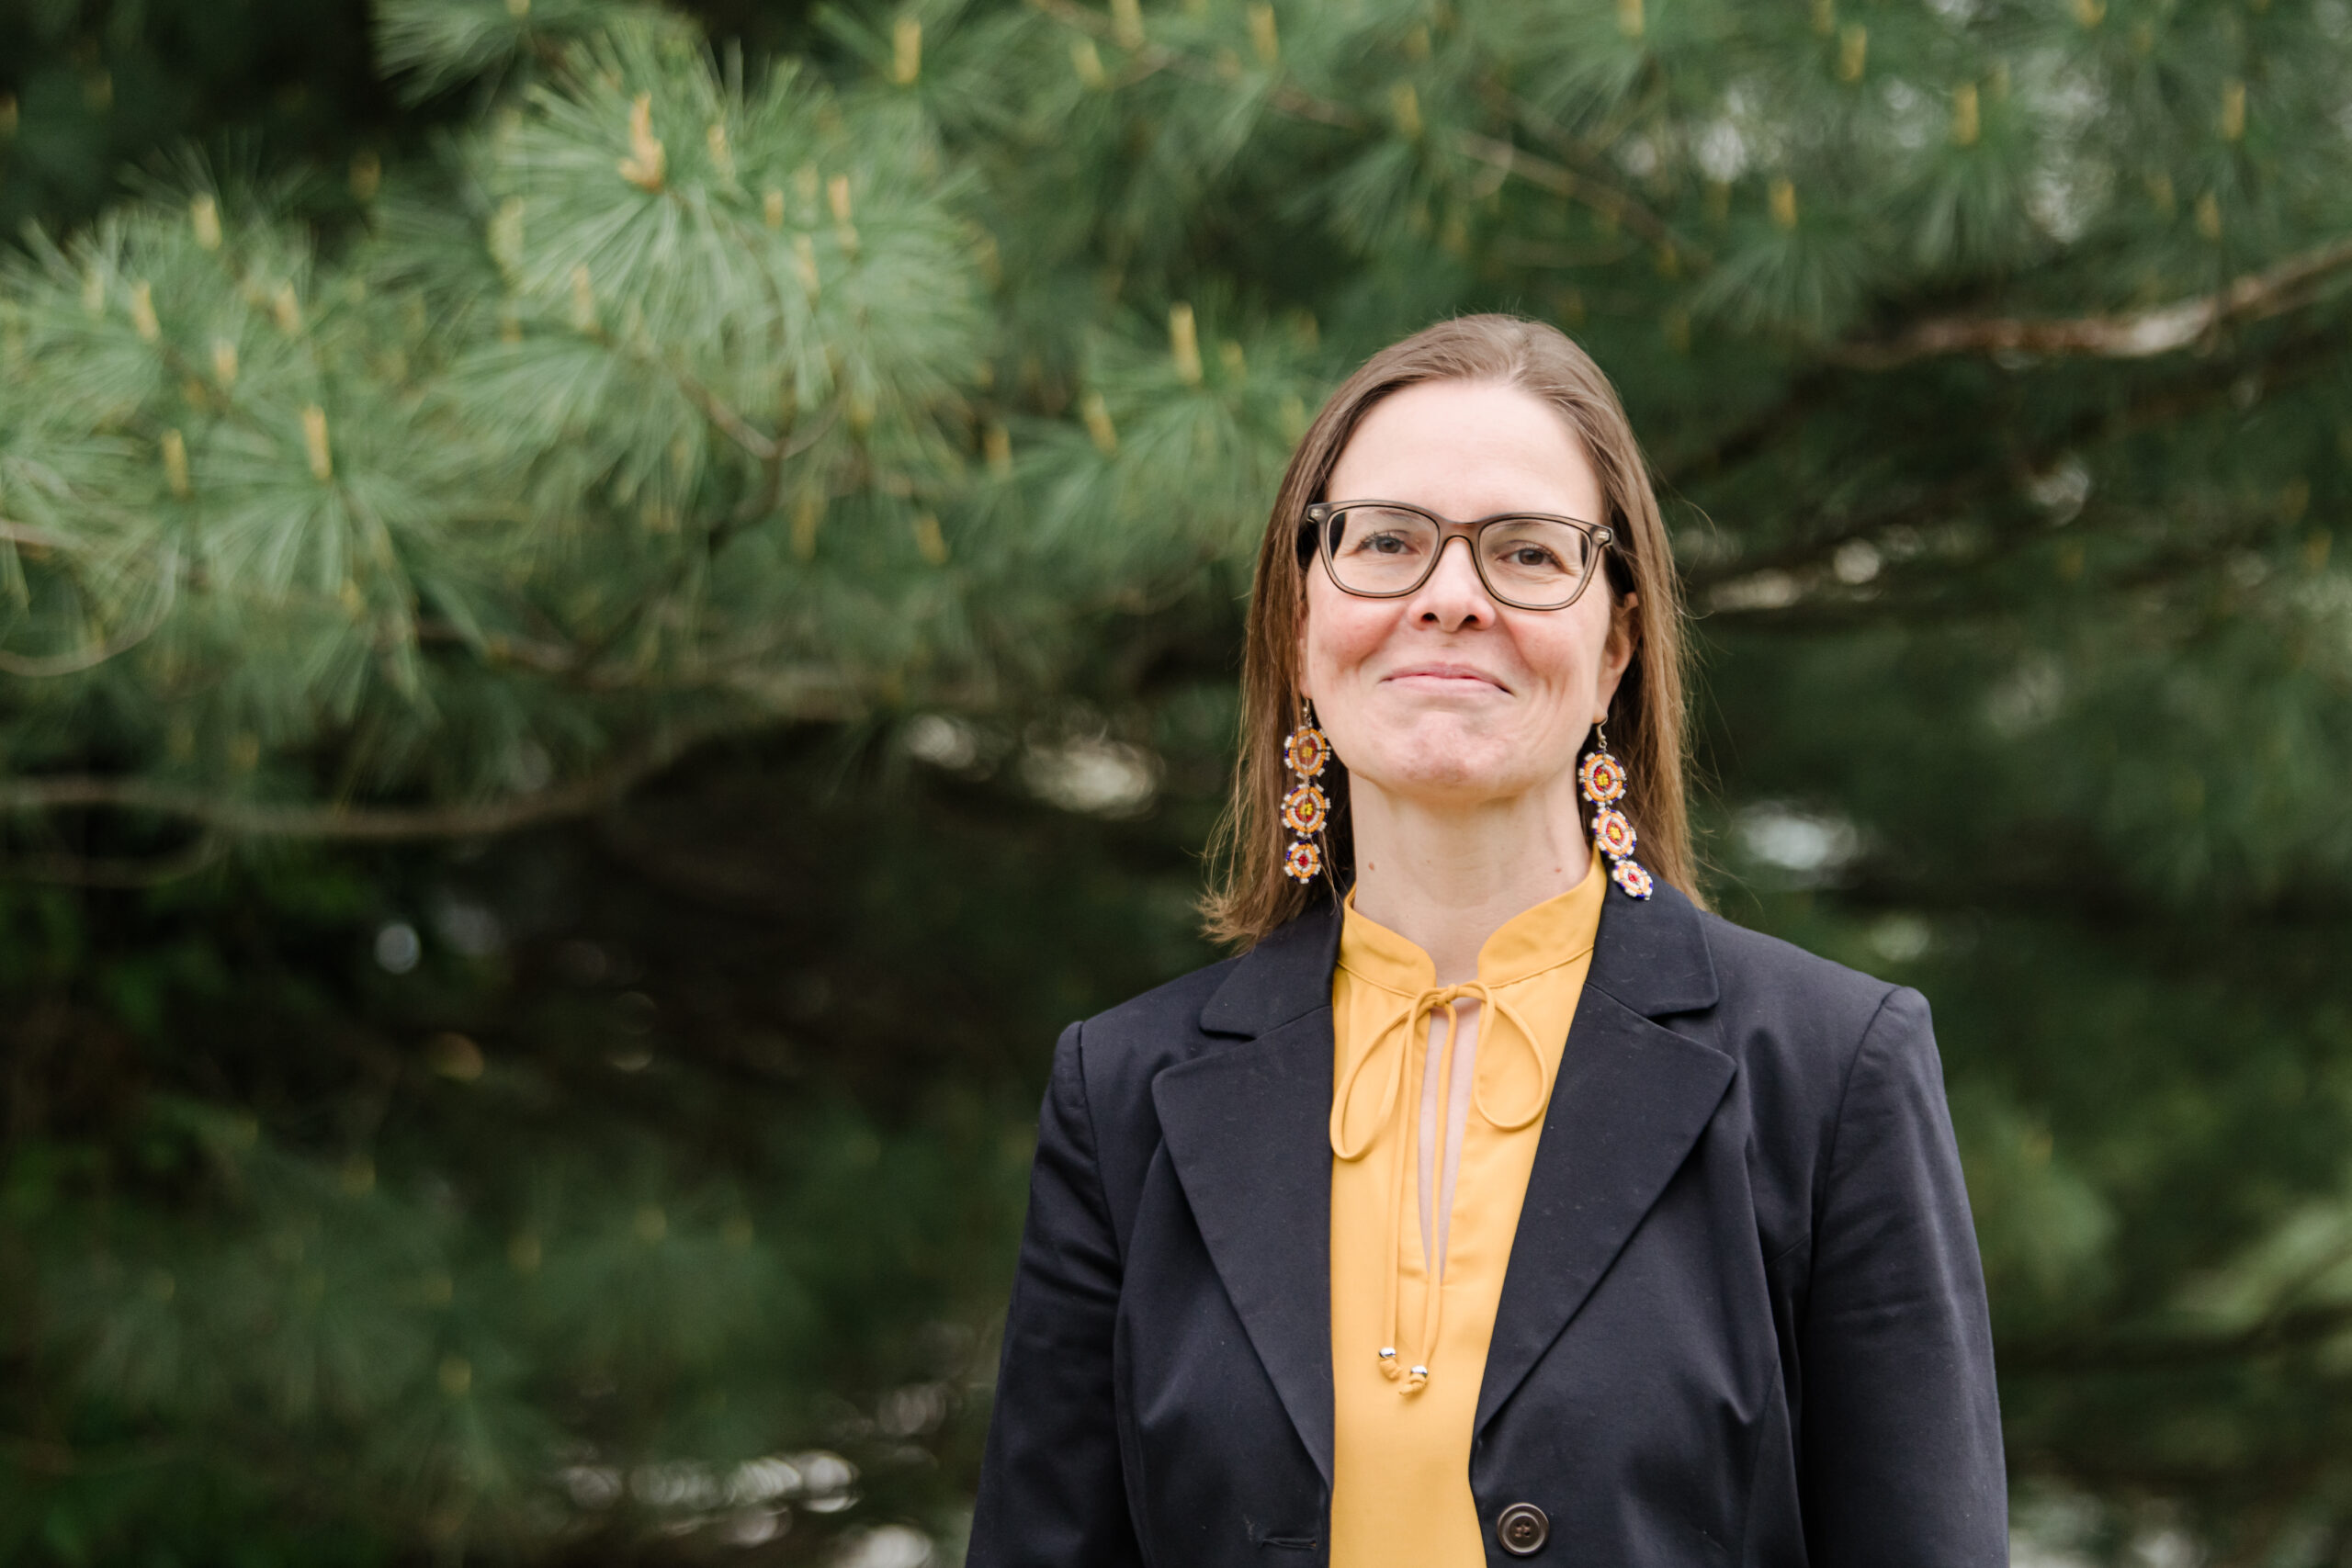 An adult wearing a black blazer and gold blouse stands outside in front of pine trees Academic Minute